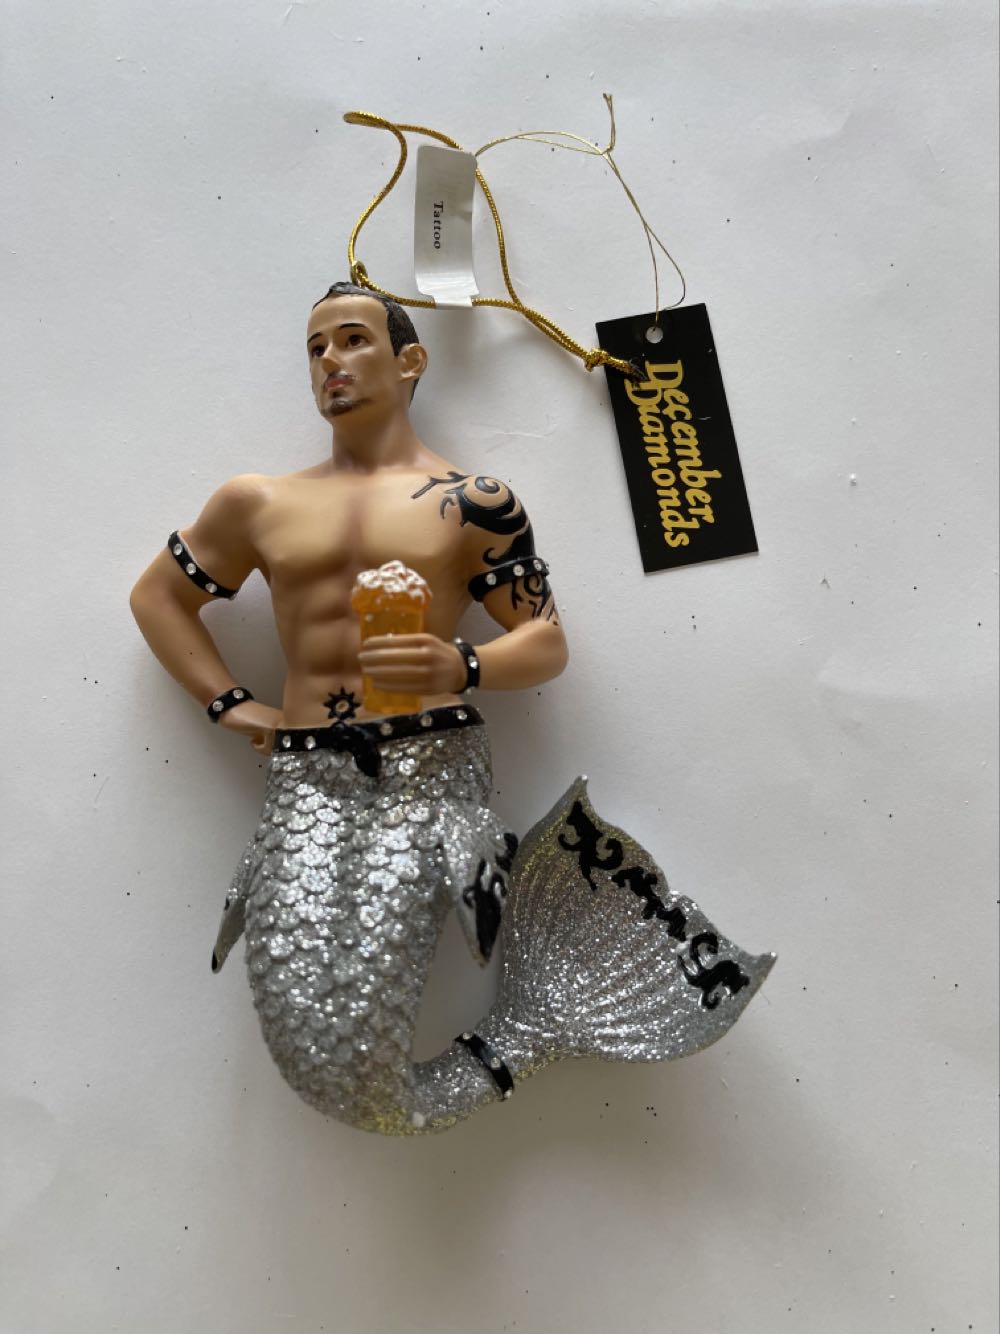 Tattoo Merman #55-50771 - It’s All About The Bling! (One World, One Ocean, Let’s Protect It!) ornament collectible [Barcode 807962907718] - Main Image 1